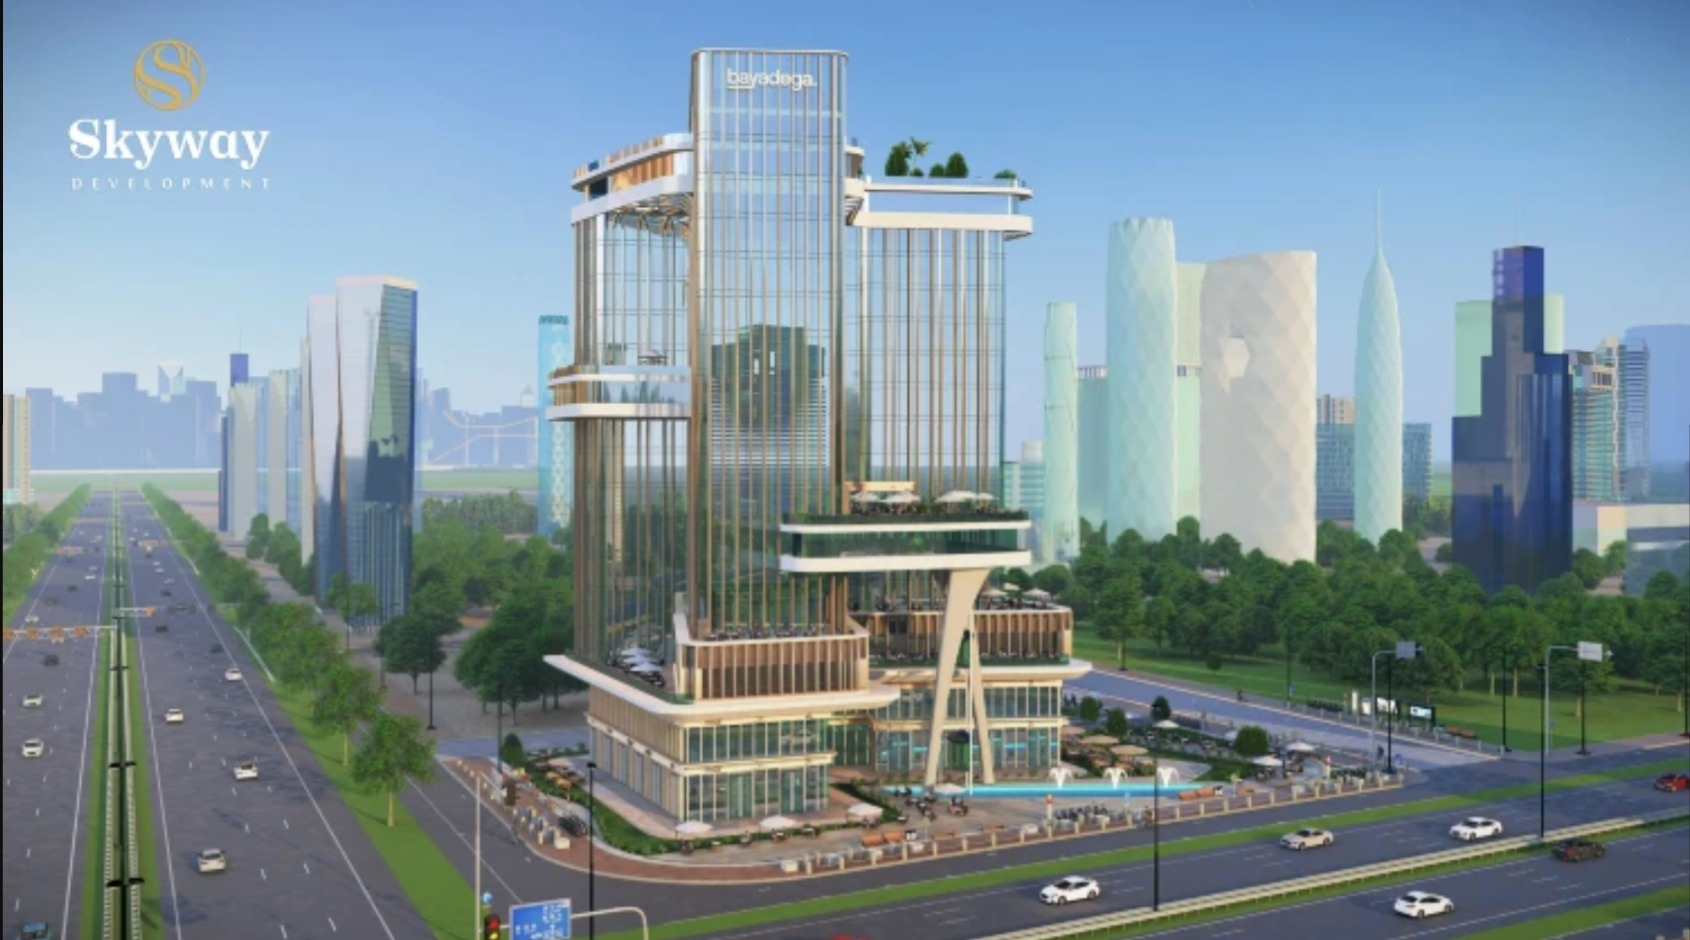 Administrative units with an area of 99 meters for reservation in Bayadega Tower New Capital